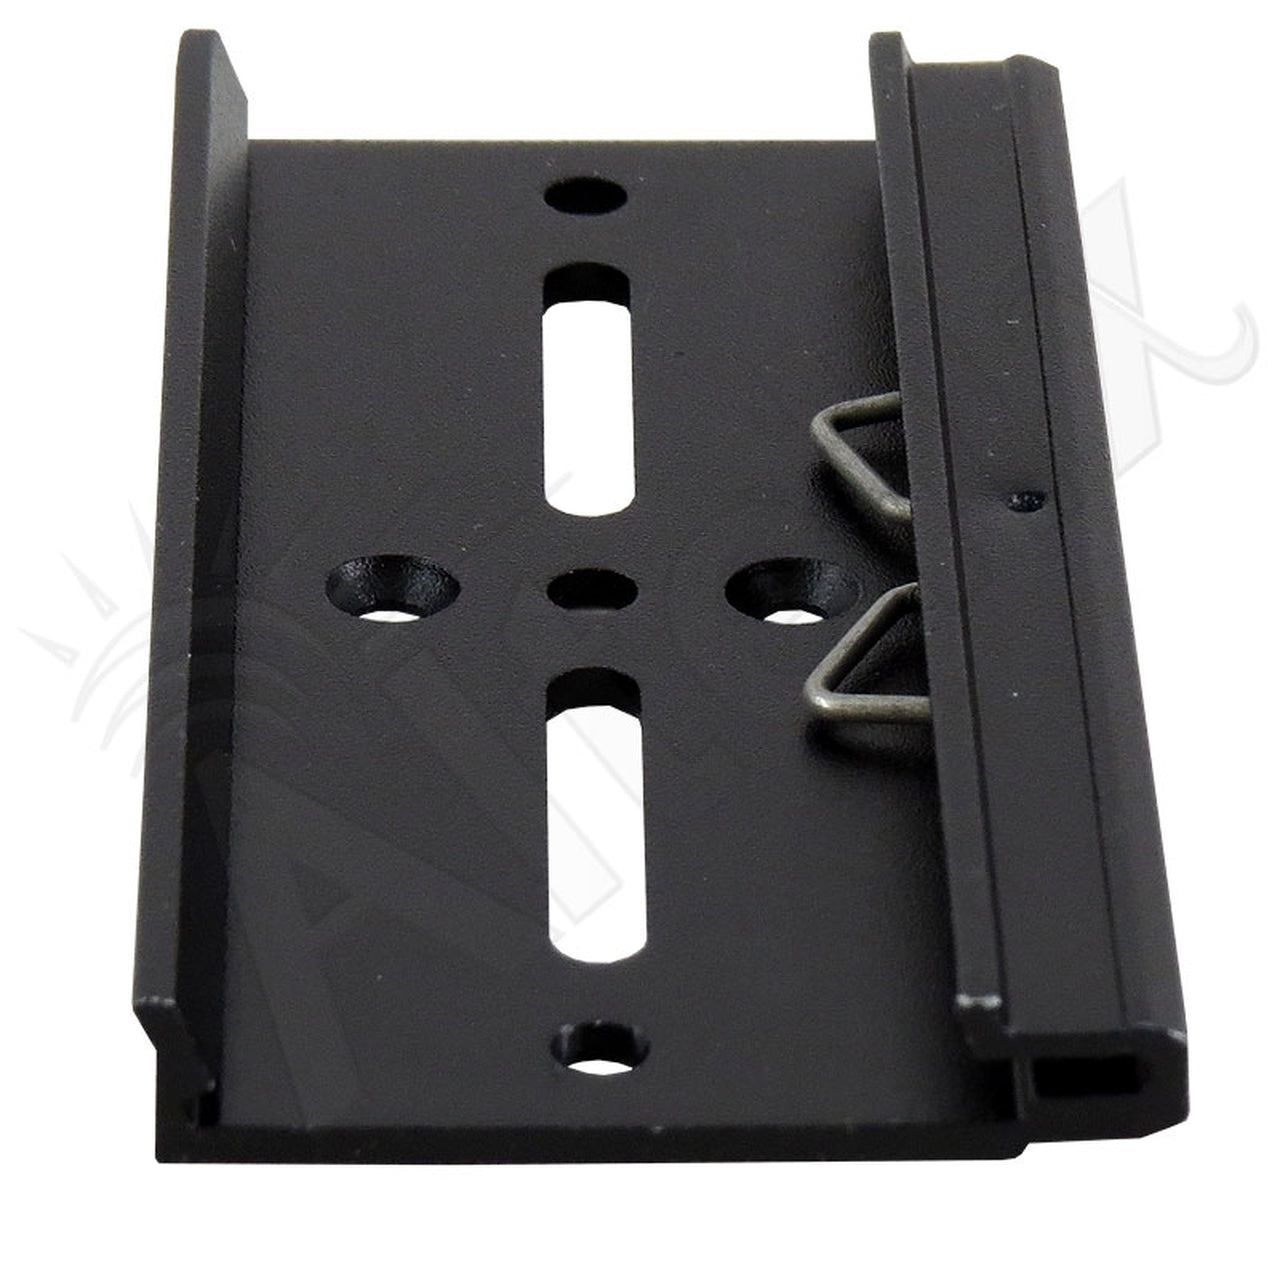 100mm Wide Aluminum DIN Rail Mounting Clip for 35mm Top Hat Rail - 0